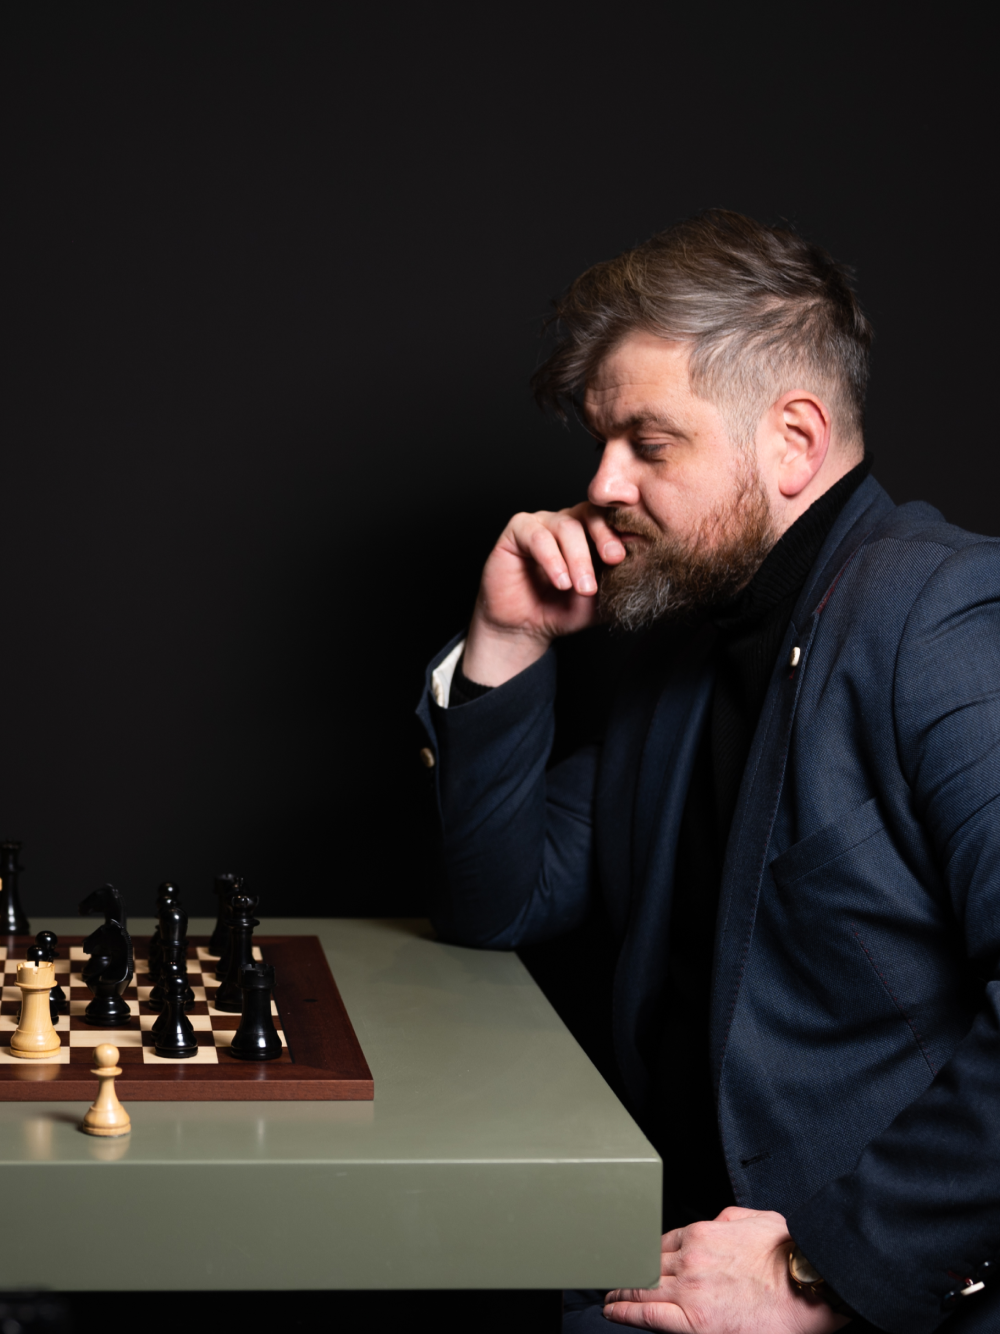 Official FIDE Approved - World Championship Chess Set and Board